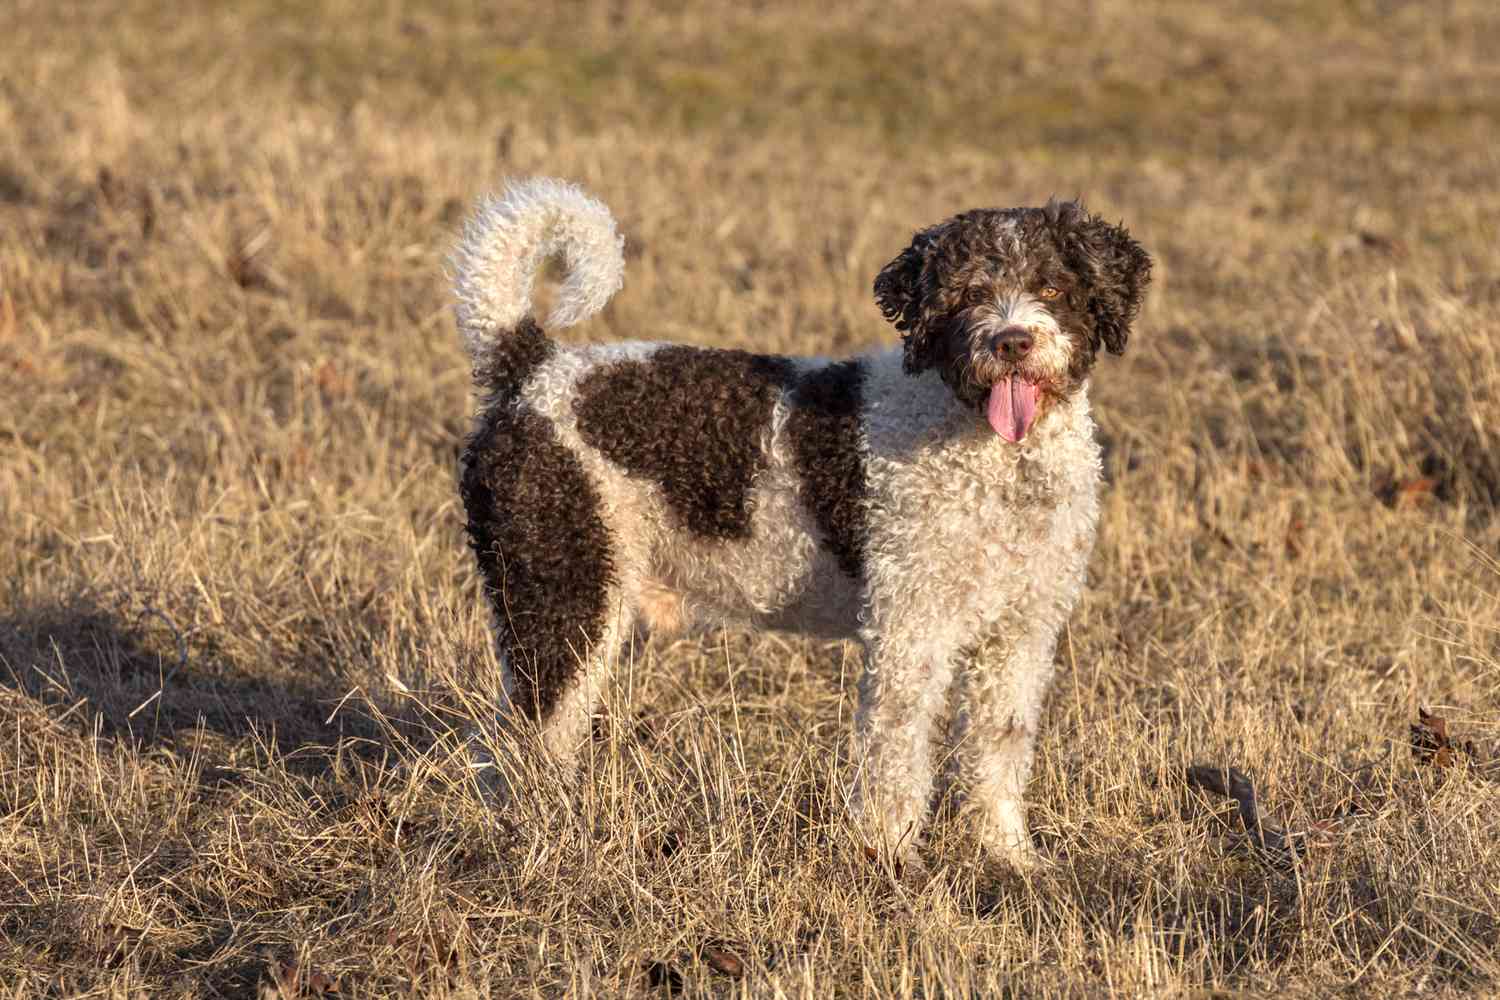 Can You Pass This Geography Quiz Where Every Question Comes With a 🐶 Dog-Related Clue? Spanish Water Dog